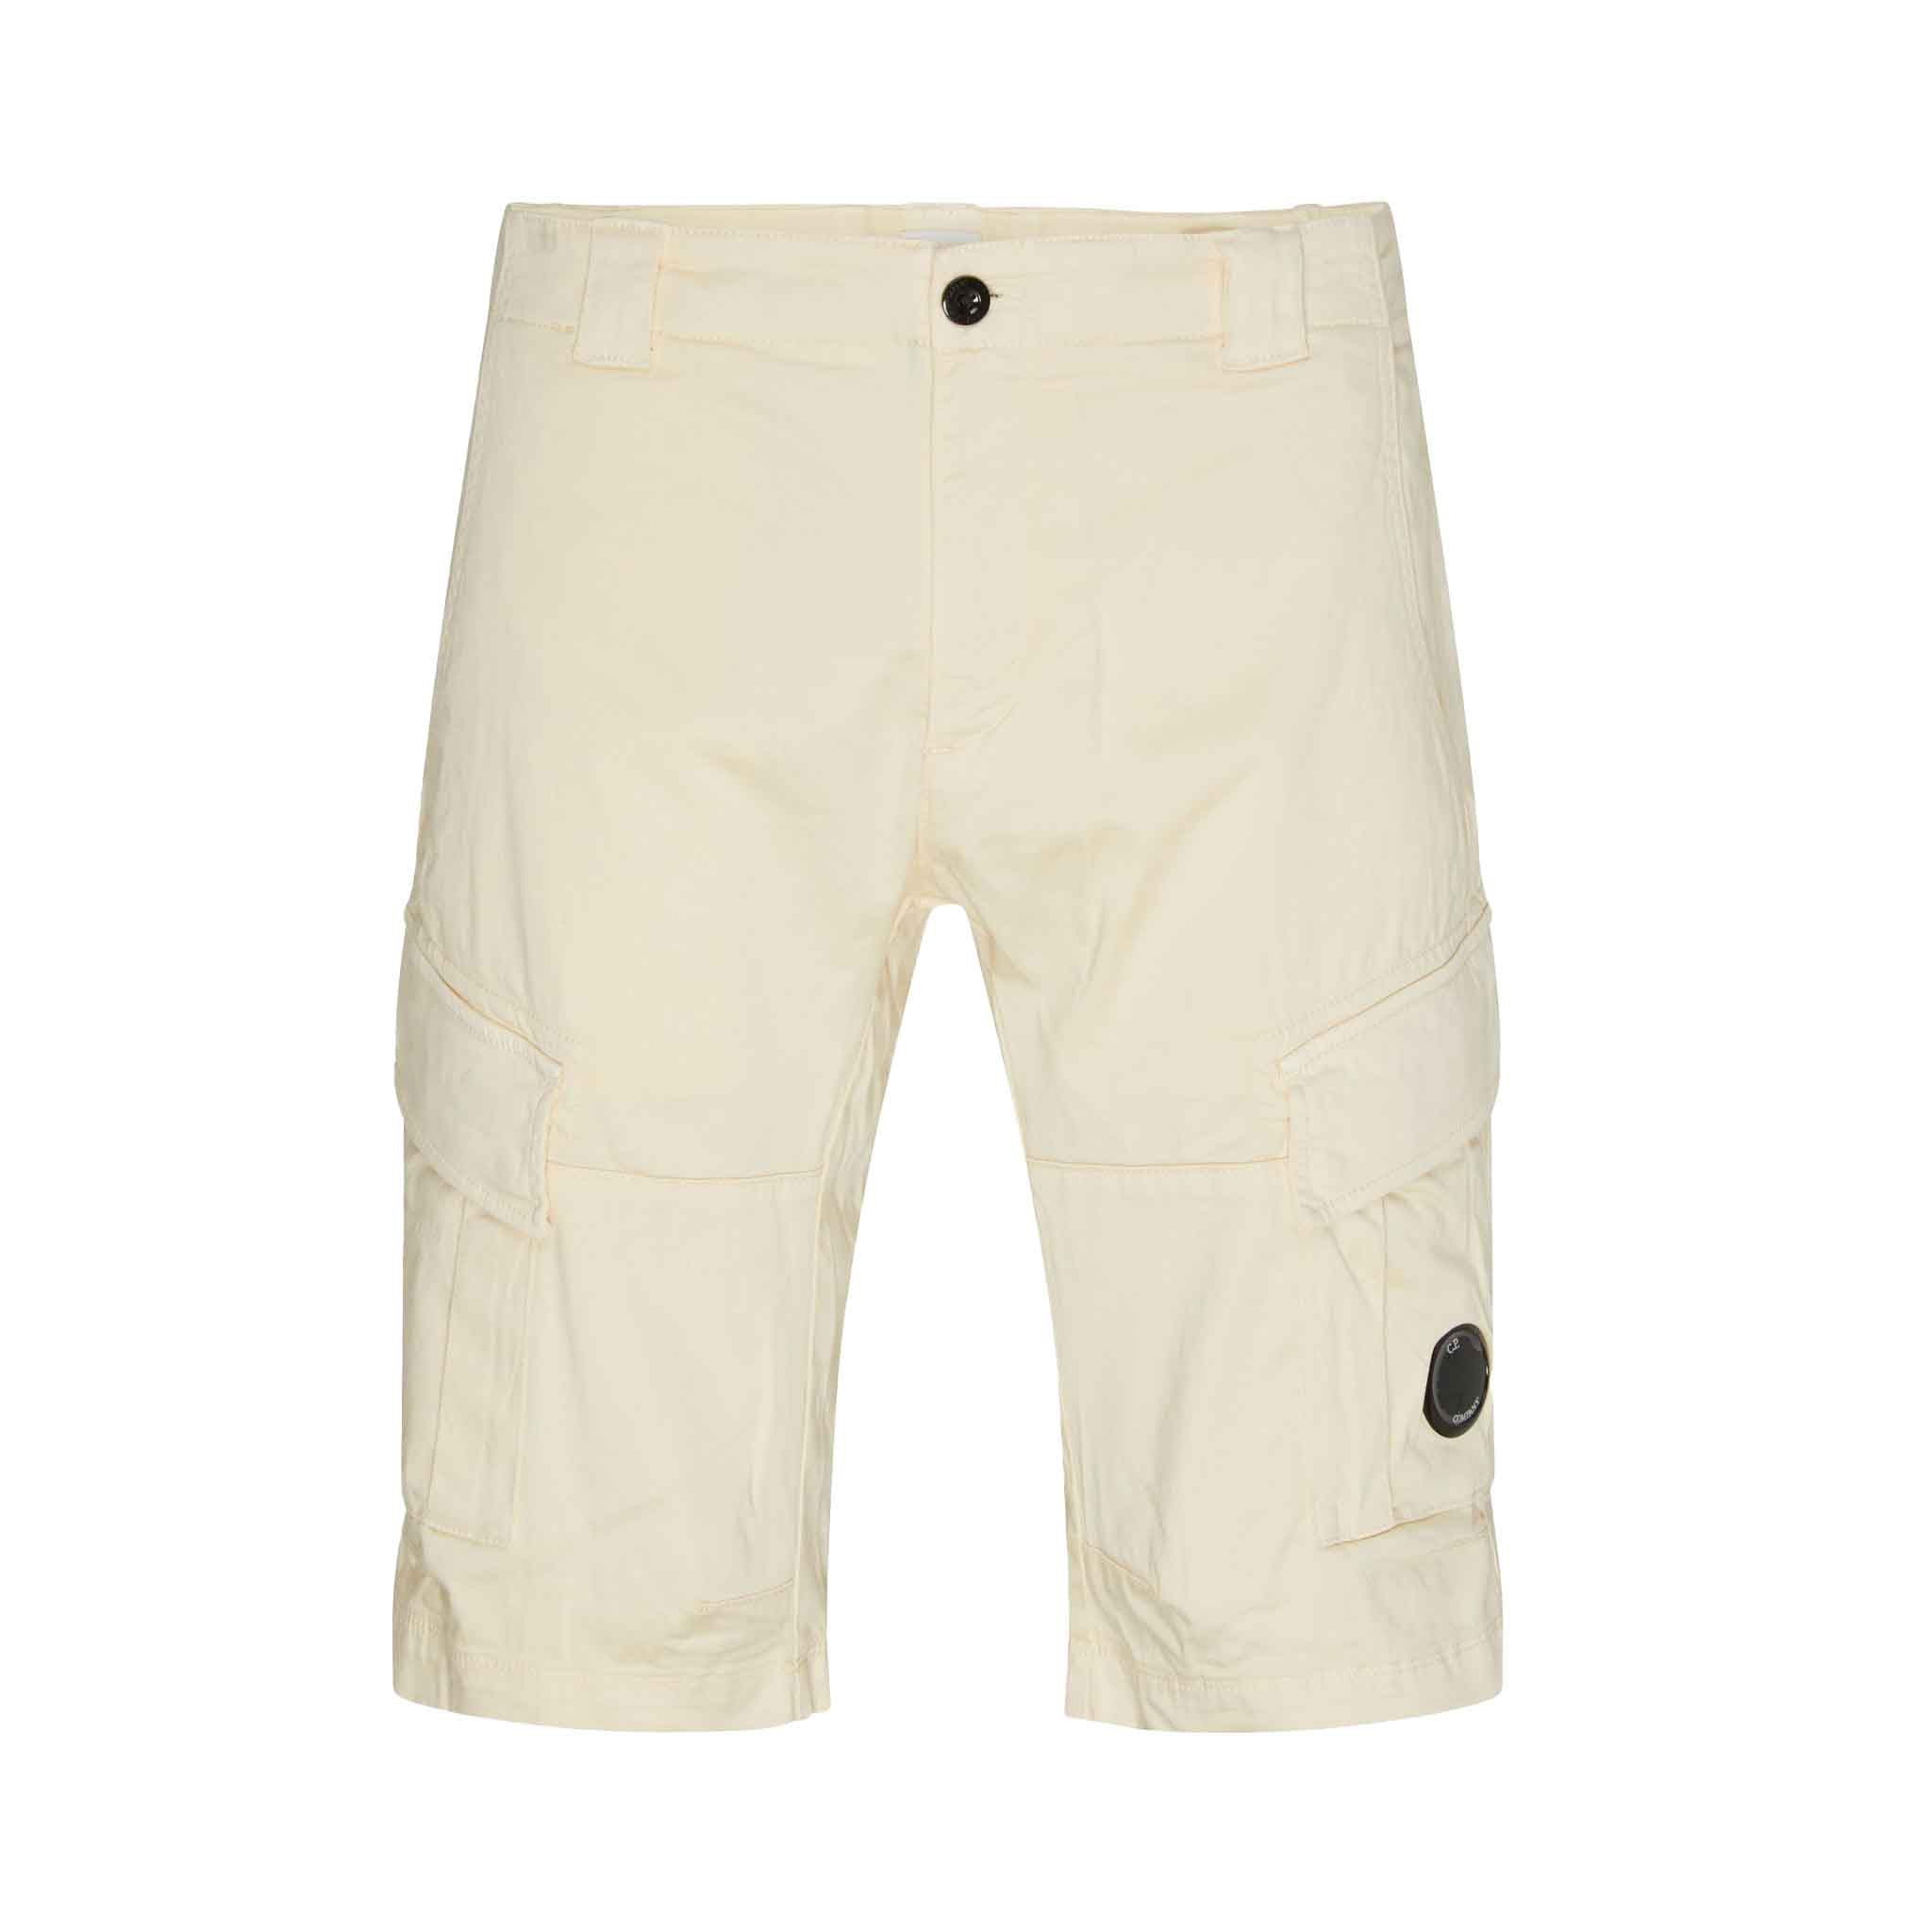 C.P. Company Stretch Sateen Cargo Shorts in Pistachio Shell